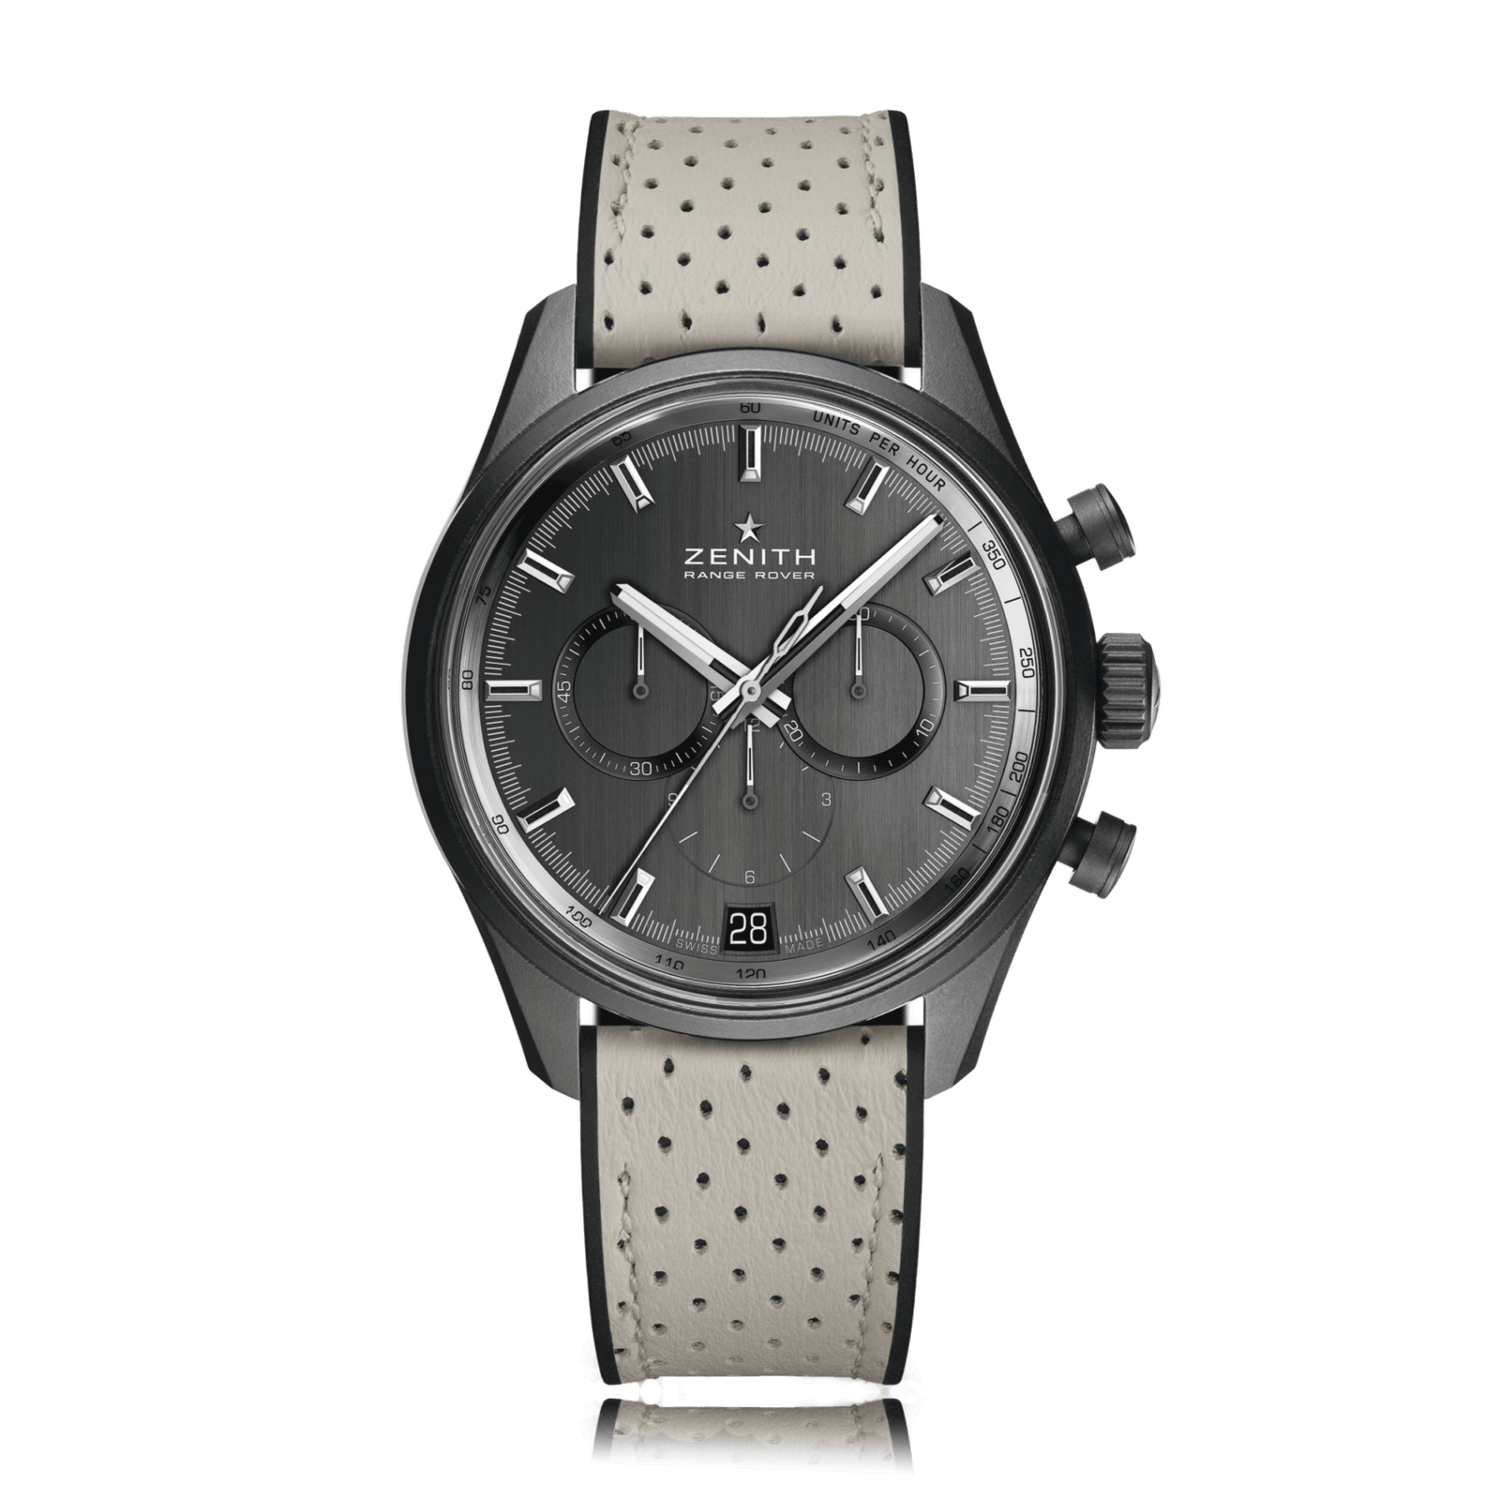 ZENITH Range Rover Automatic Aluminum Grey Dial Mens Watch 24.2040.400/27.R797